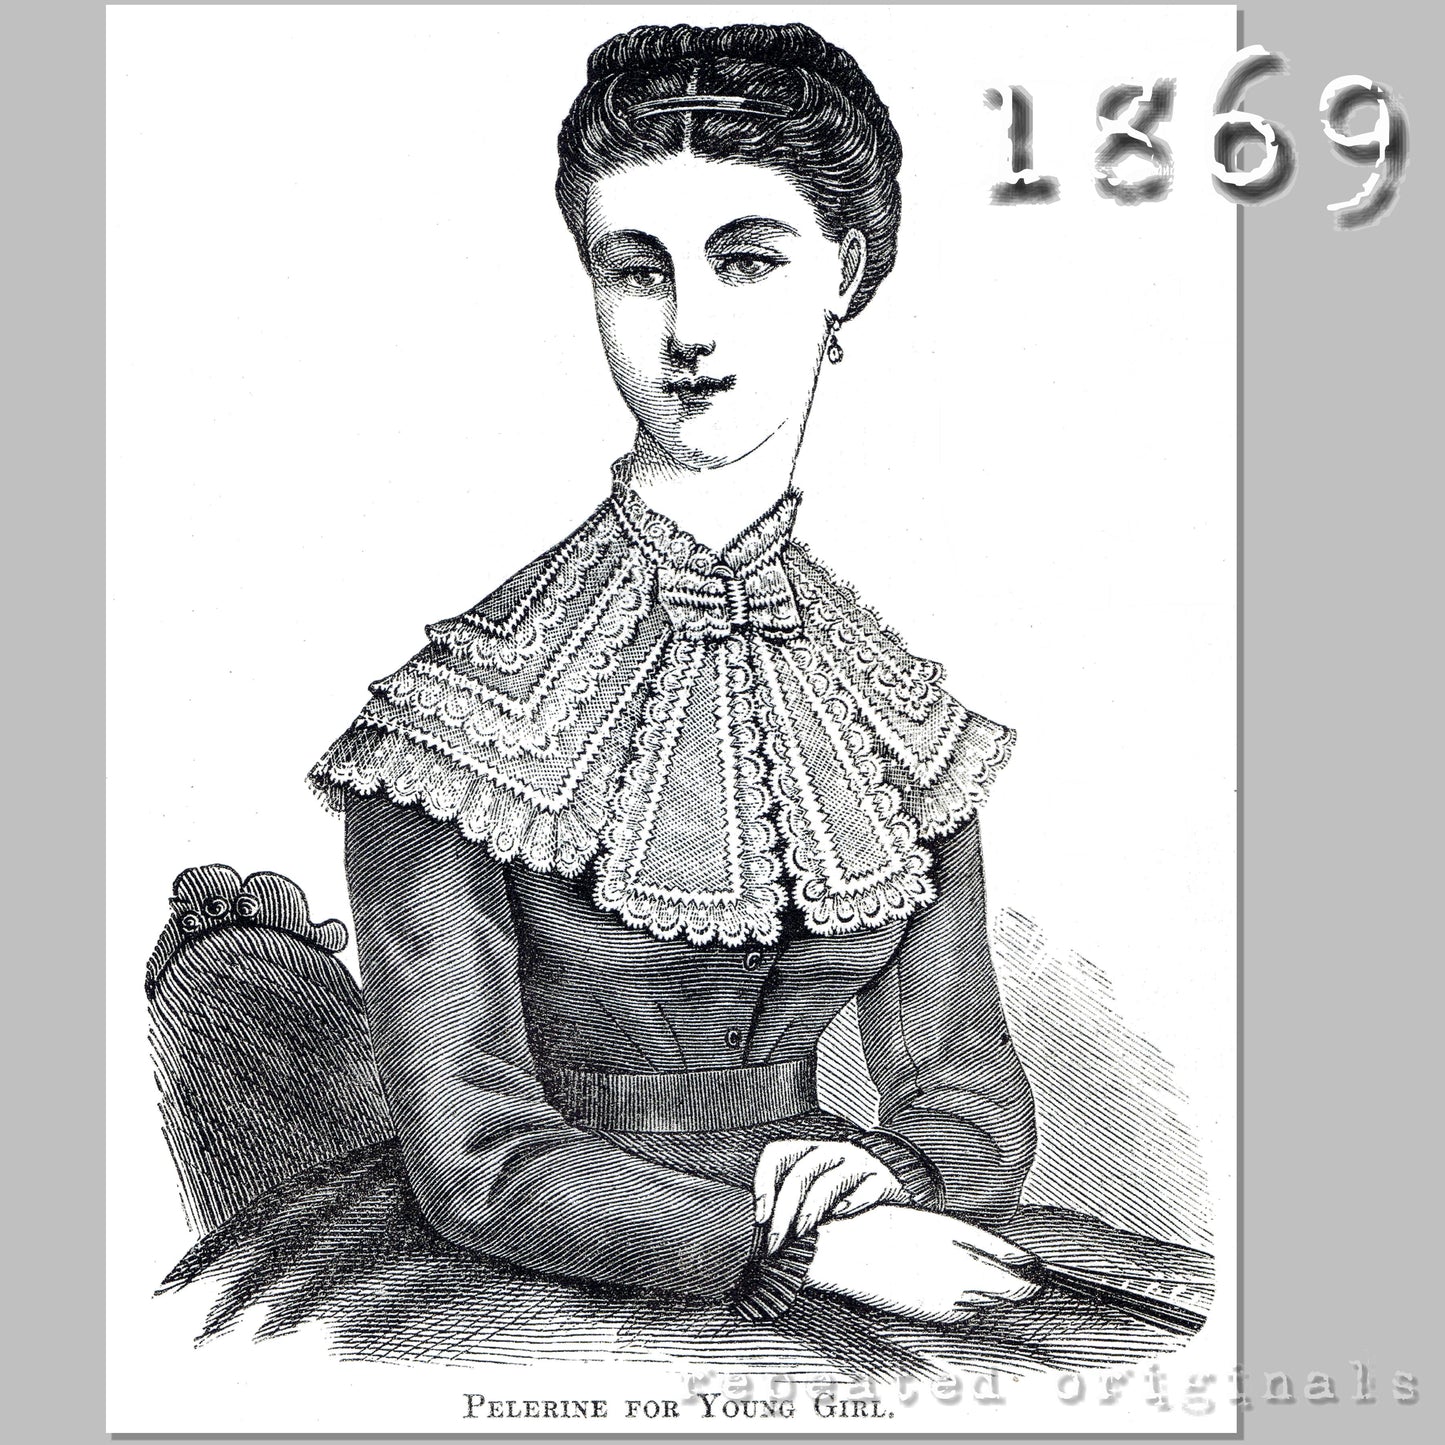 1869 Pelerine for Young Girl Sewing Pattern - INSTANT DOWNLOAD PDF